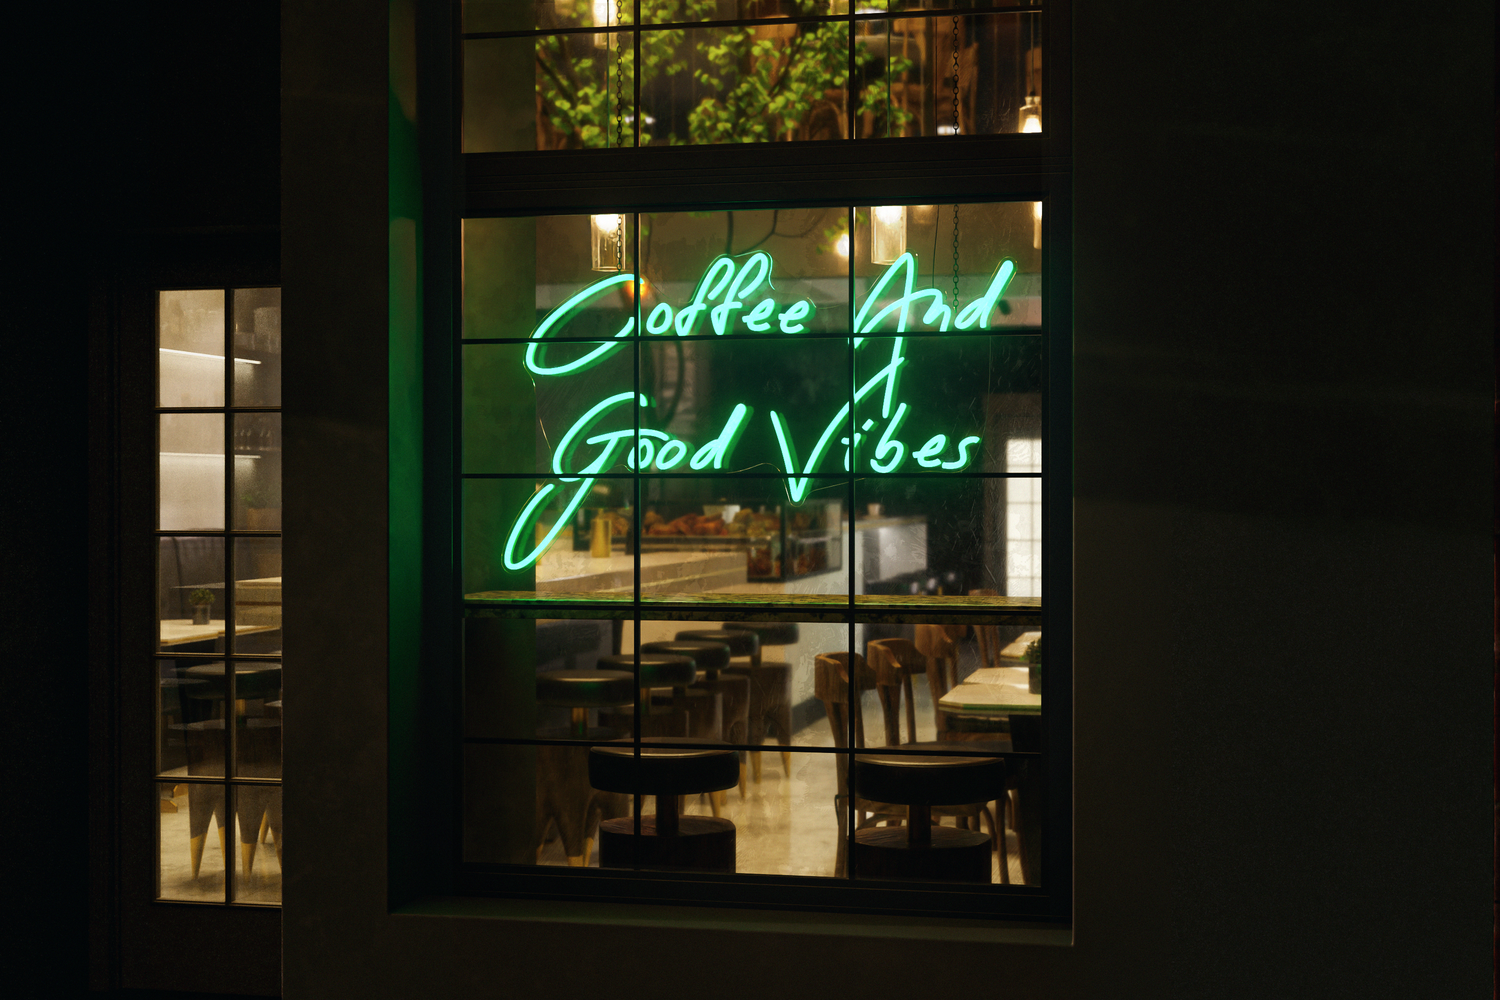 A green neon sign that says coffee and good vibes